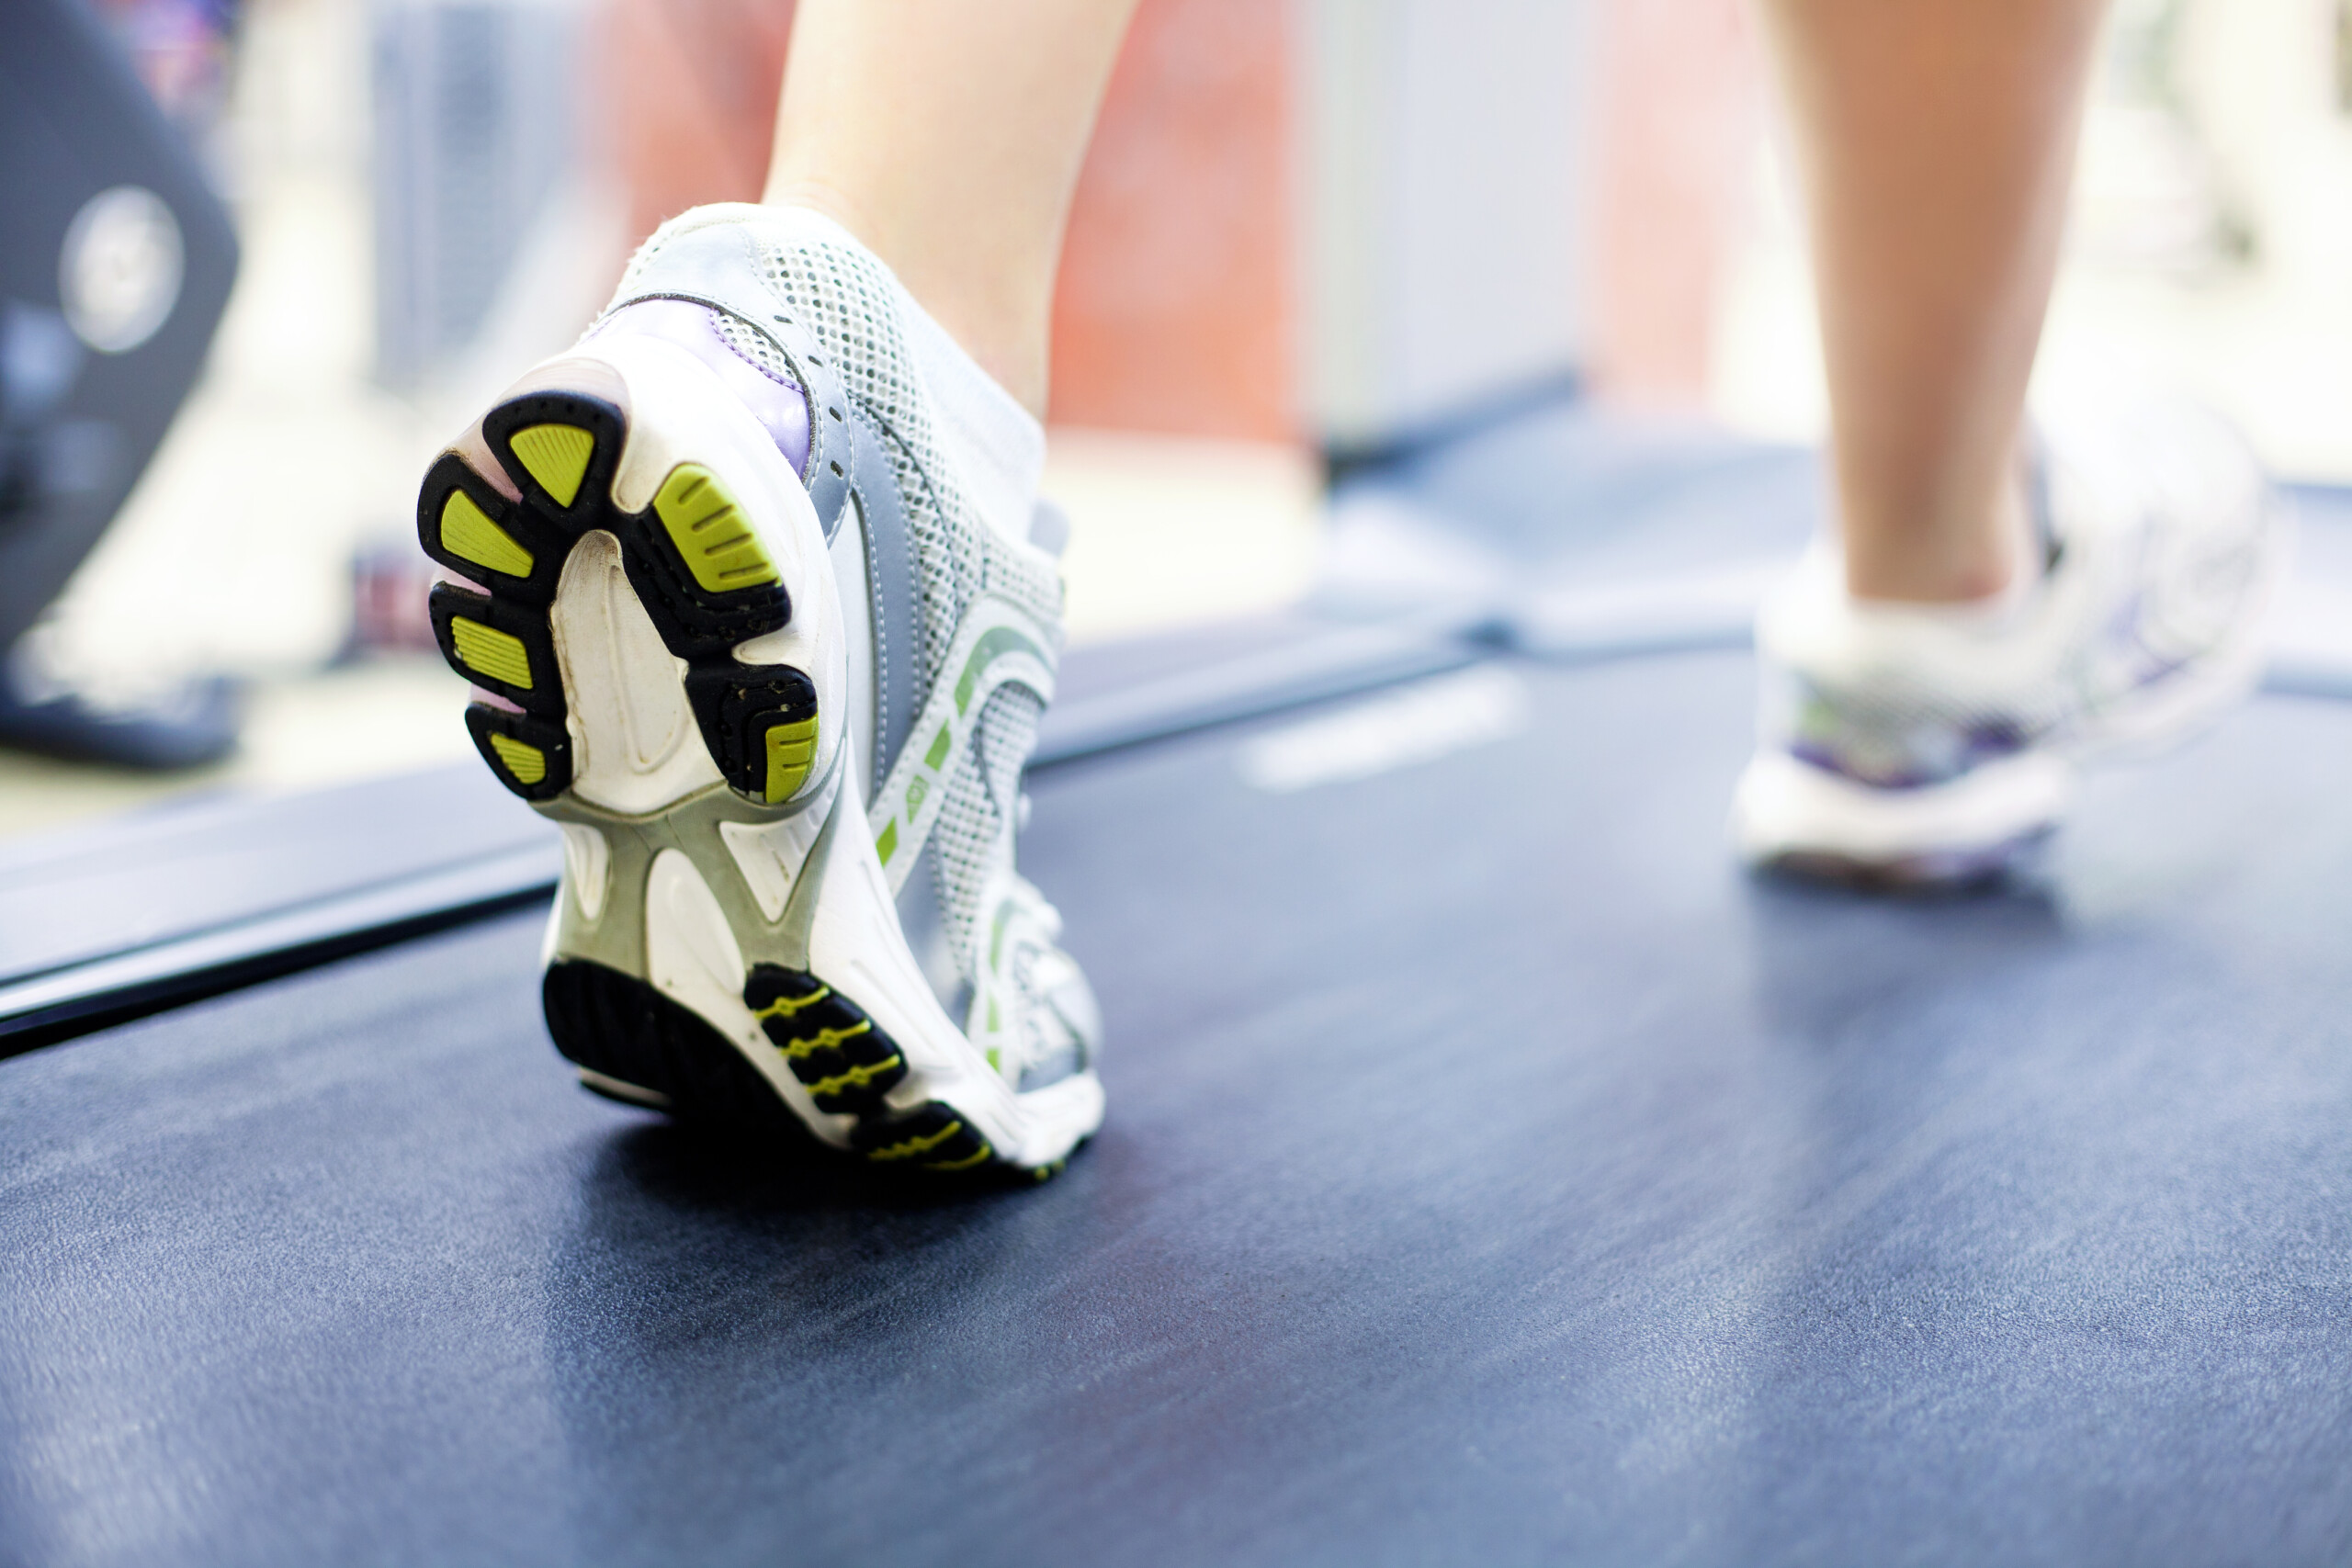 Can Treadmill Walking Cause Stress Fractures to the Foot?